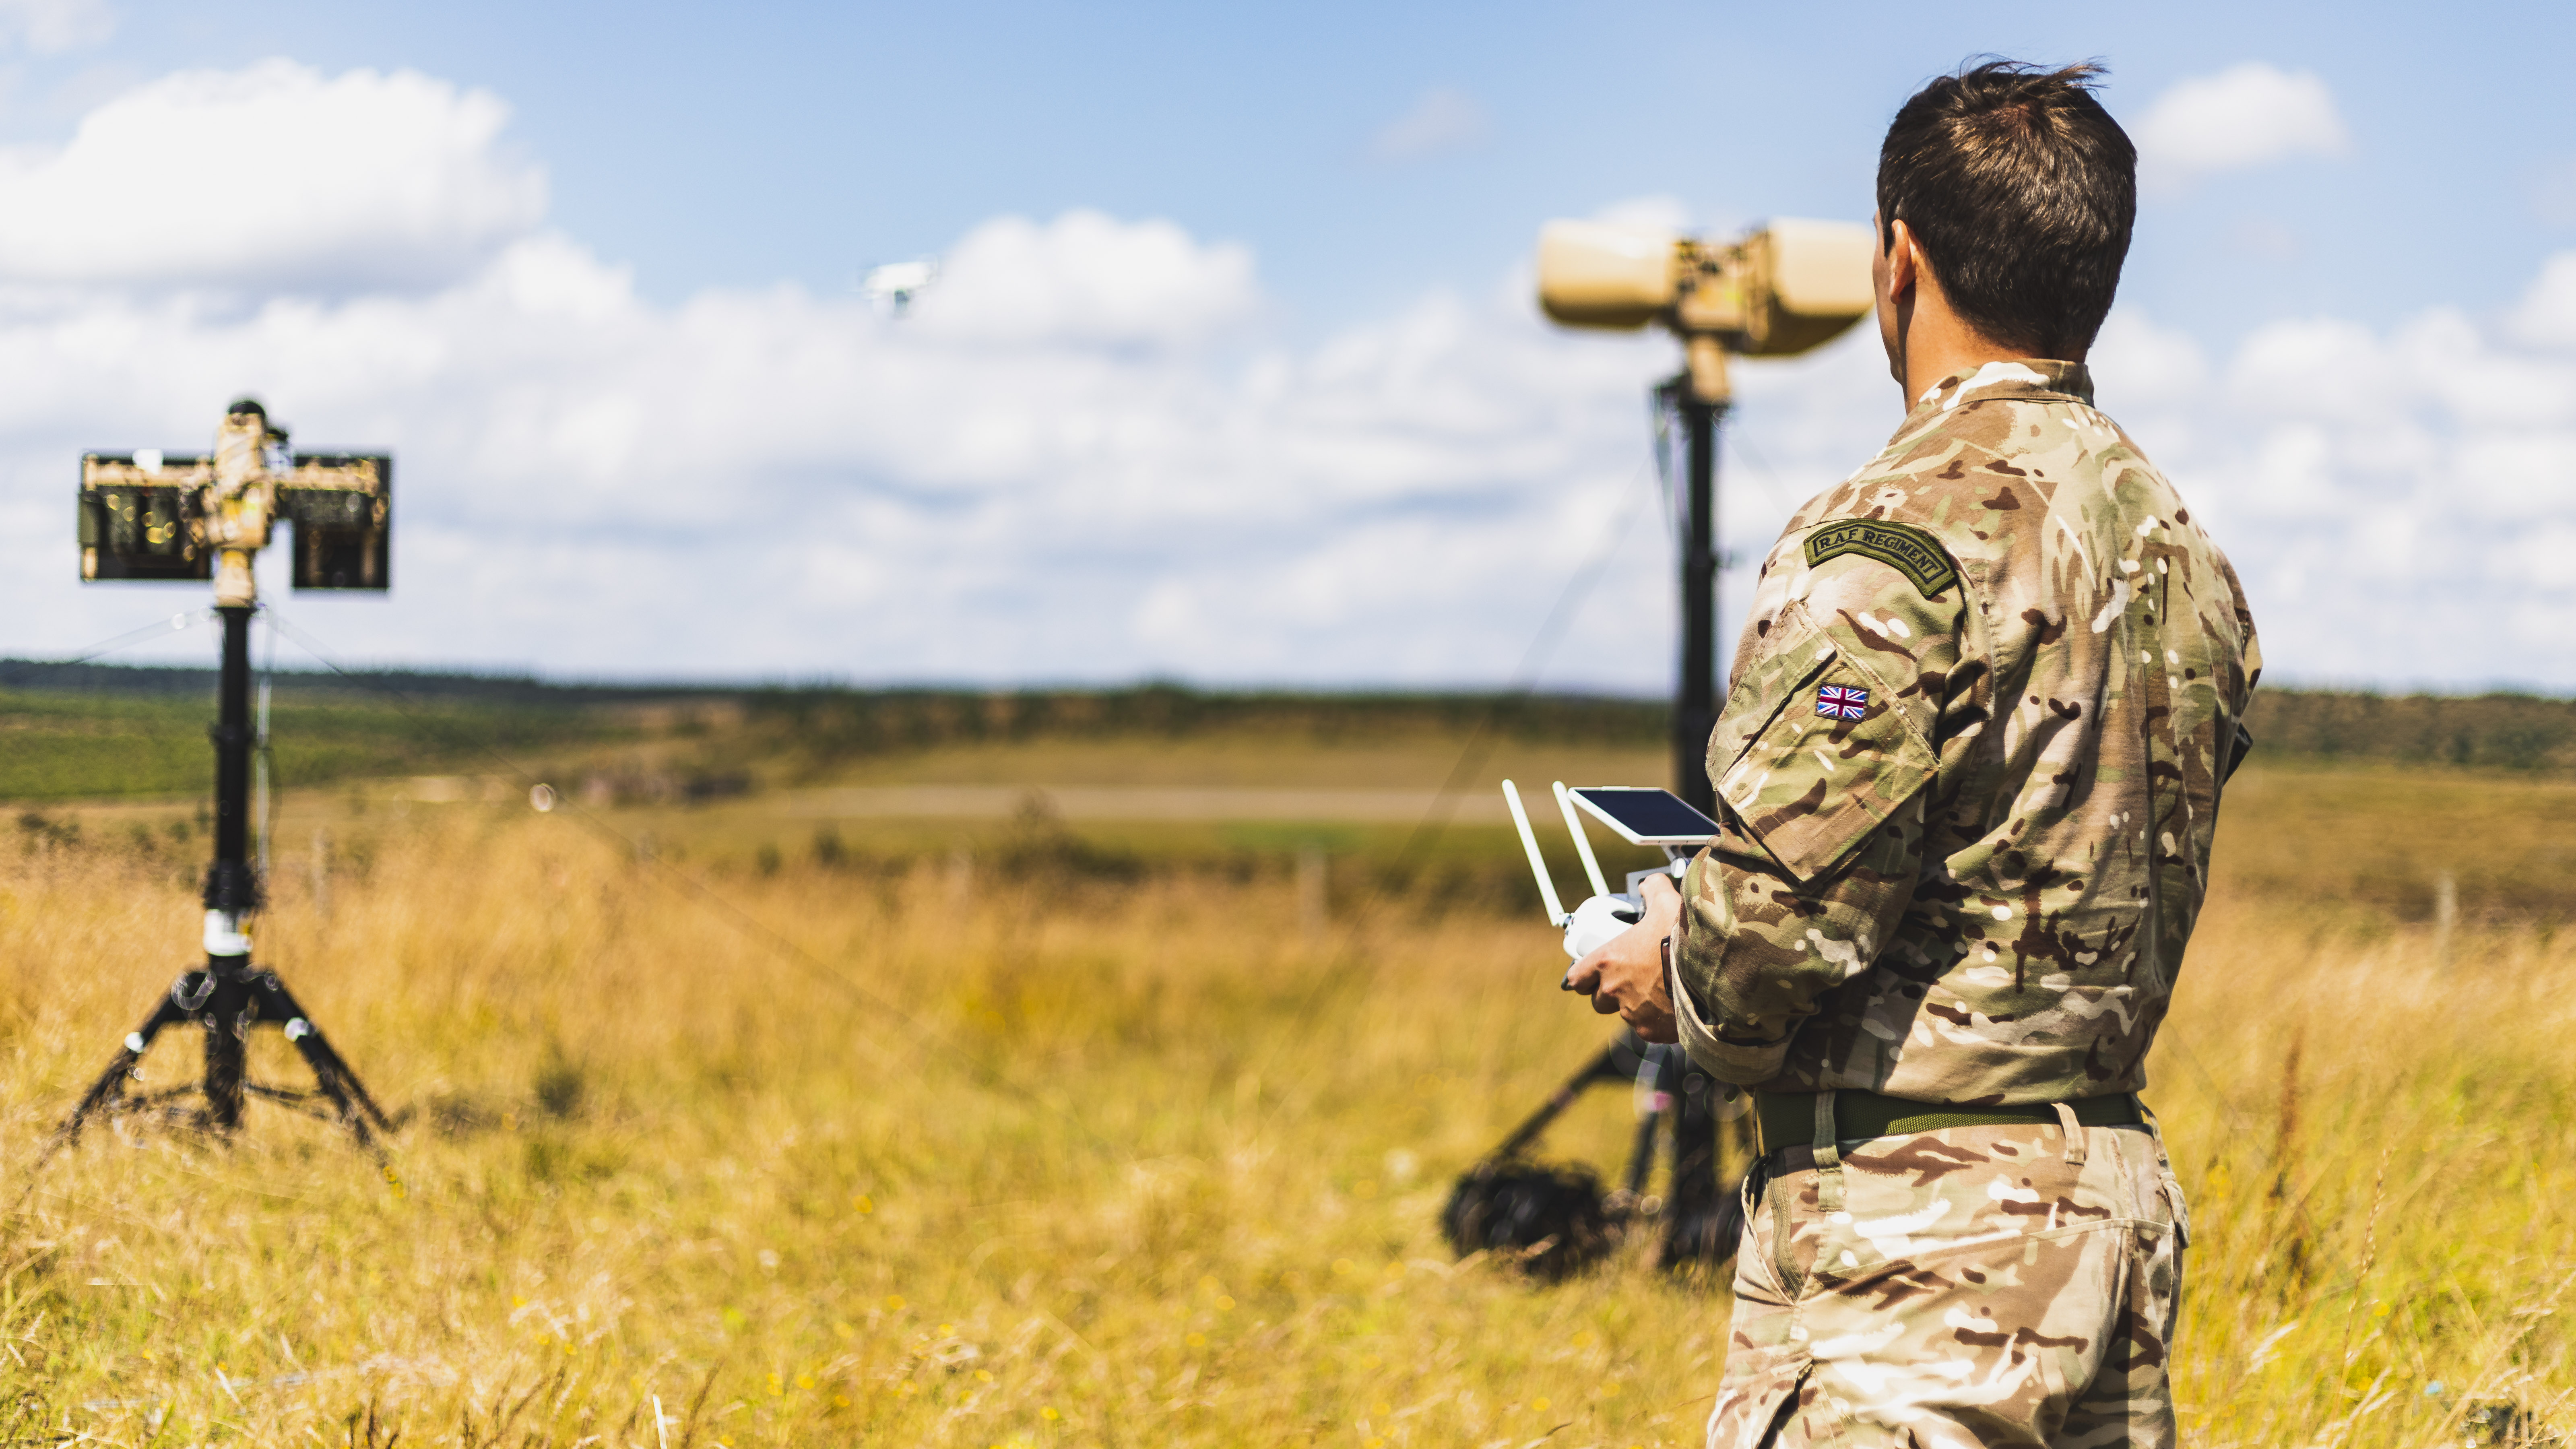 Image shows RAF Regiment training with drone by Air System equipment.